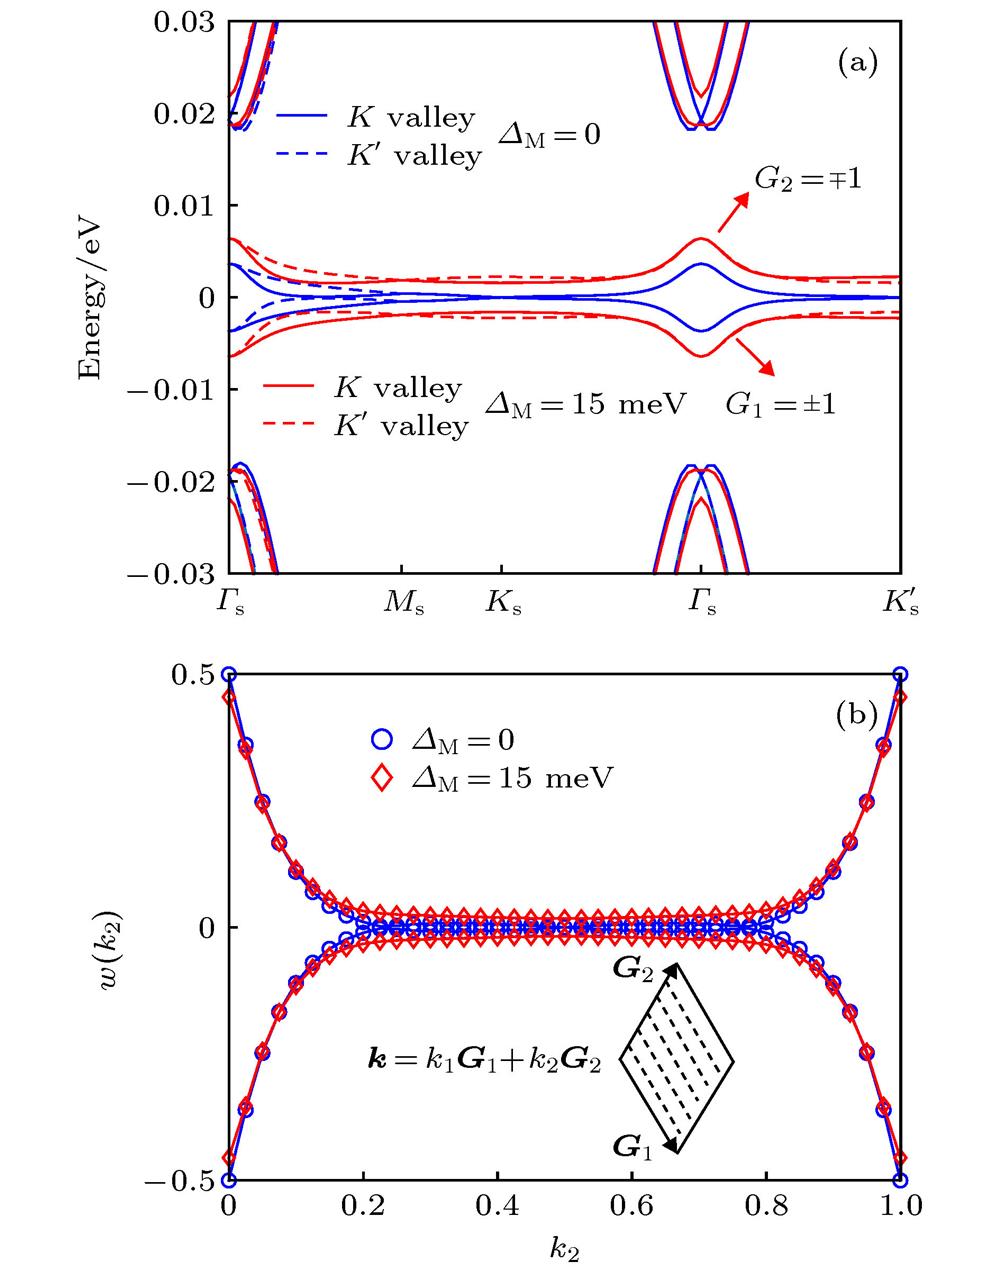 (a) Band structures of twisted bilayer graphene at the magic angle; (b)Wilson loops of the two flat bands from the K valley of twisted bilayer graphene (in ).